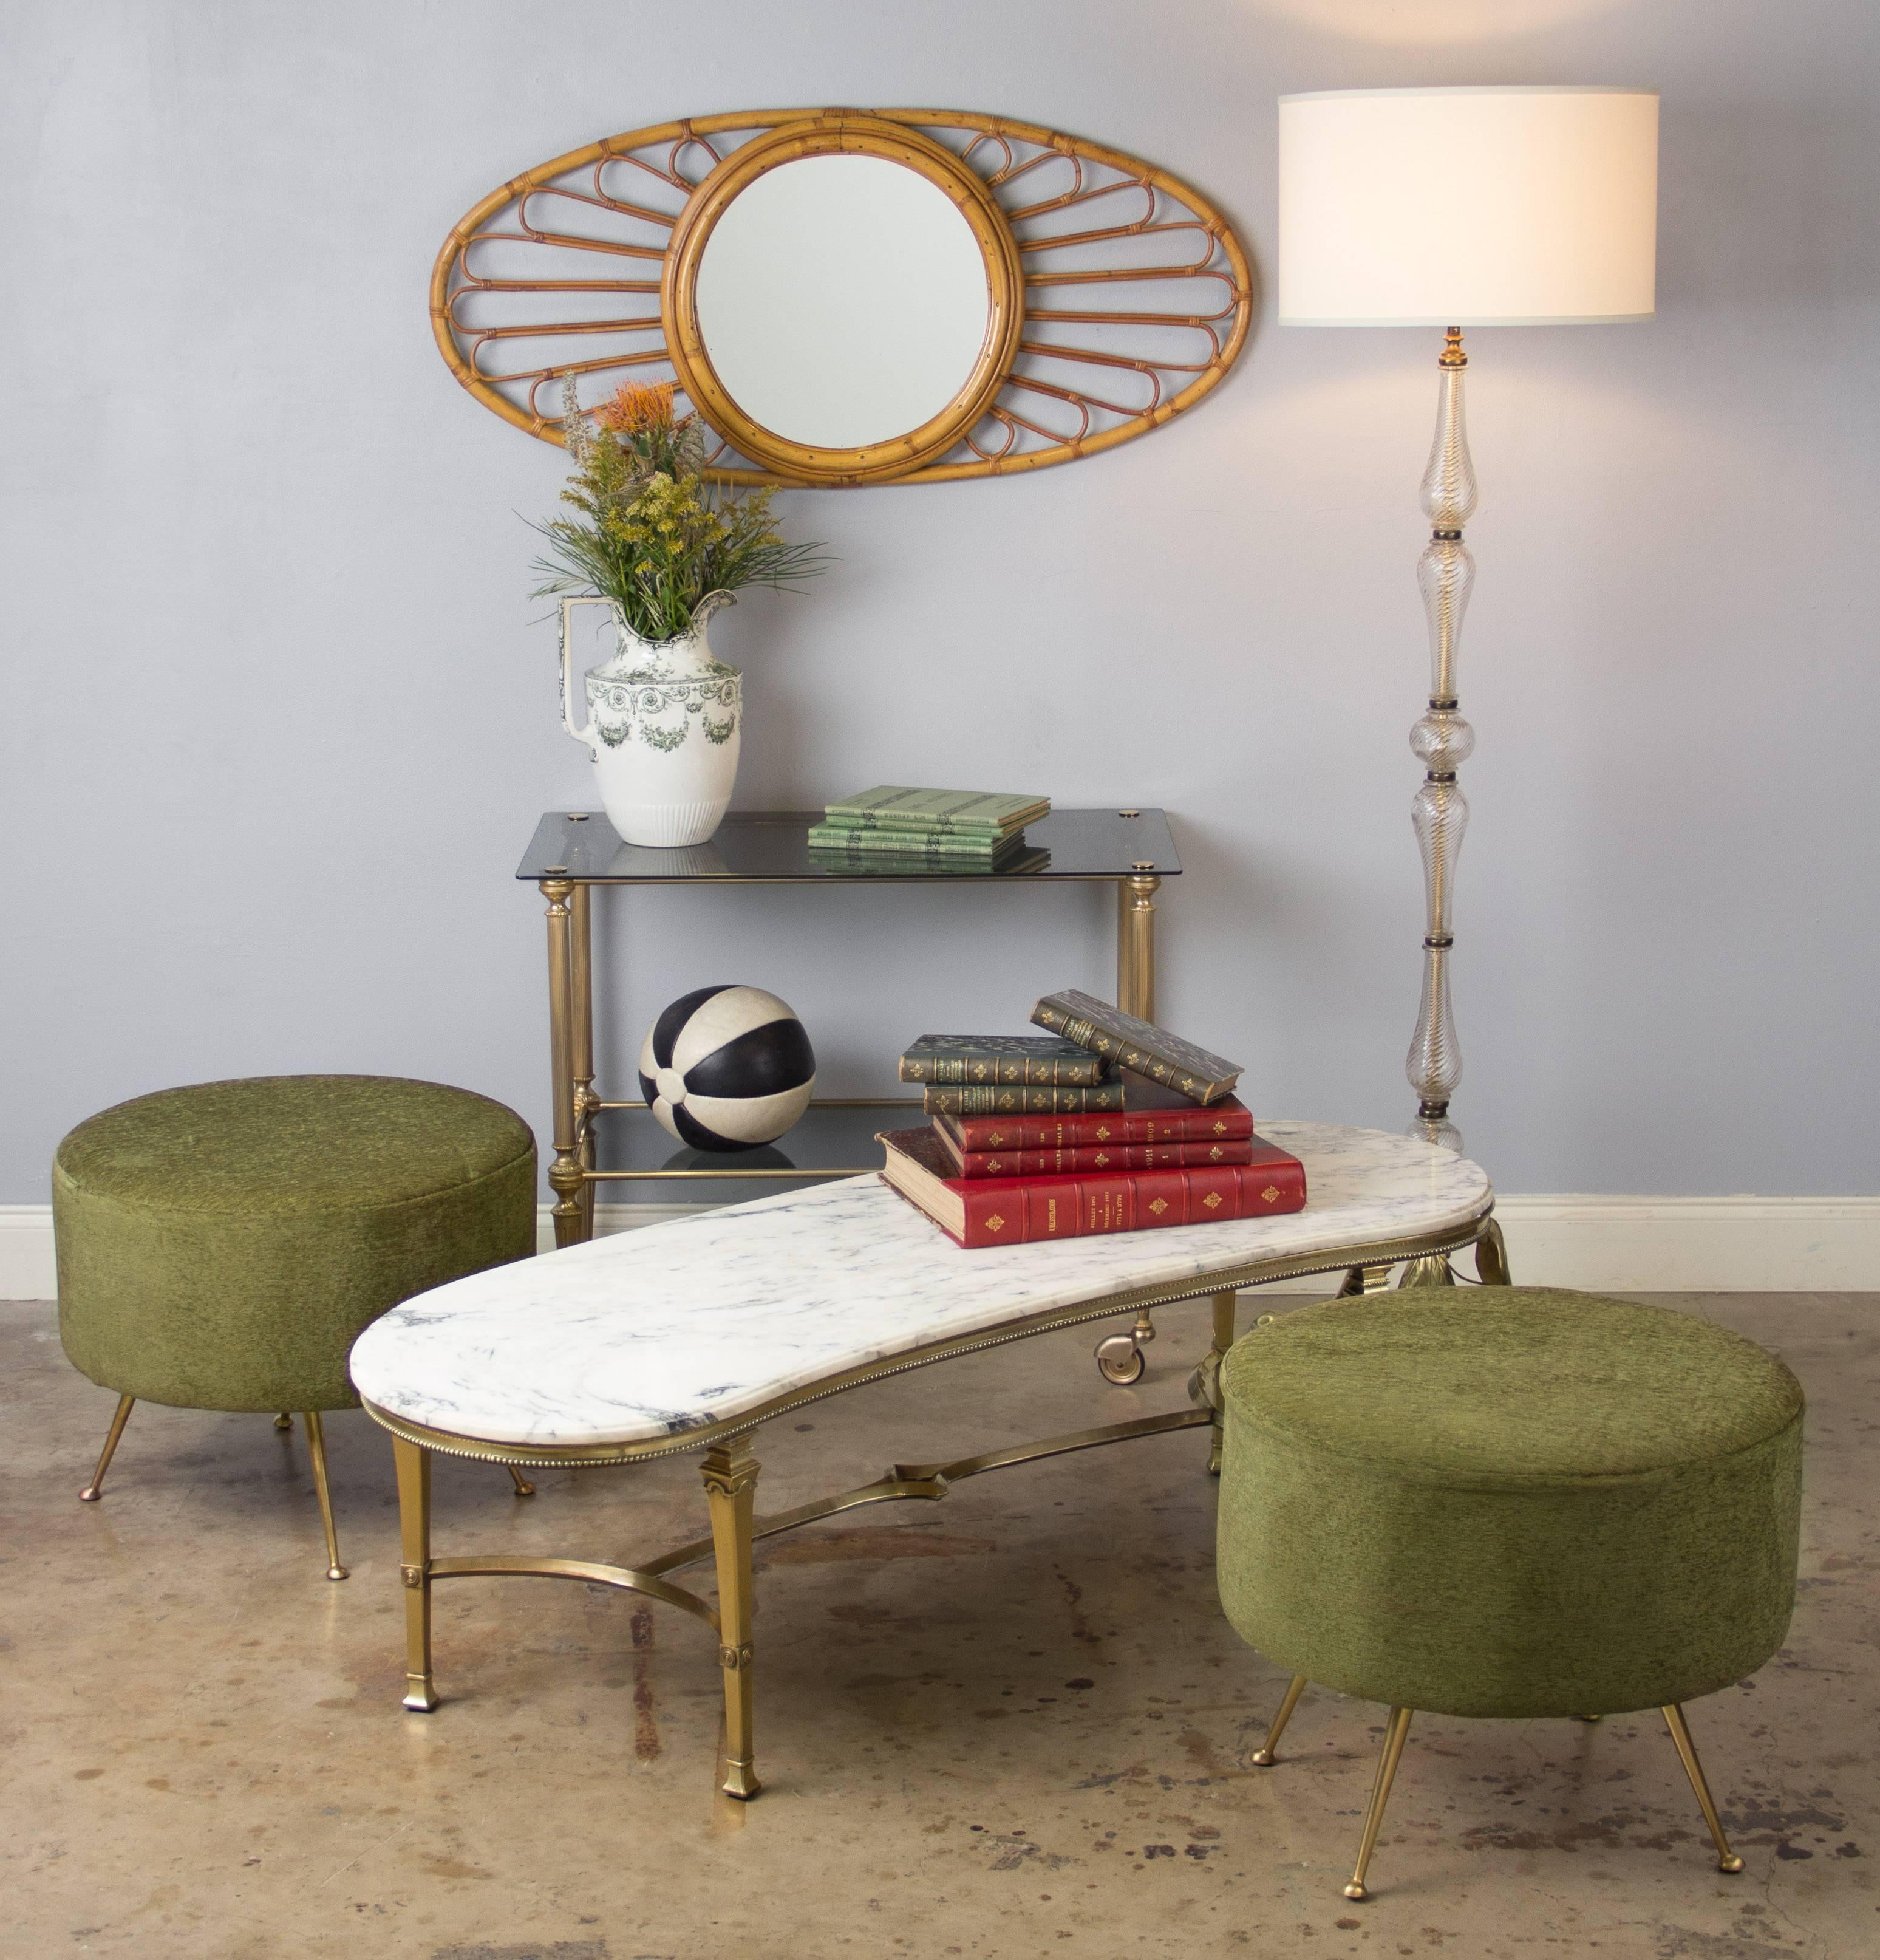 A great pair of round ottomans or poufs from Italy, circa 1960s, with an olive green mohair seat and slanted brass legs. Large and very comfortable, wonderful Mid-Century design.